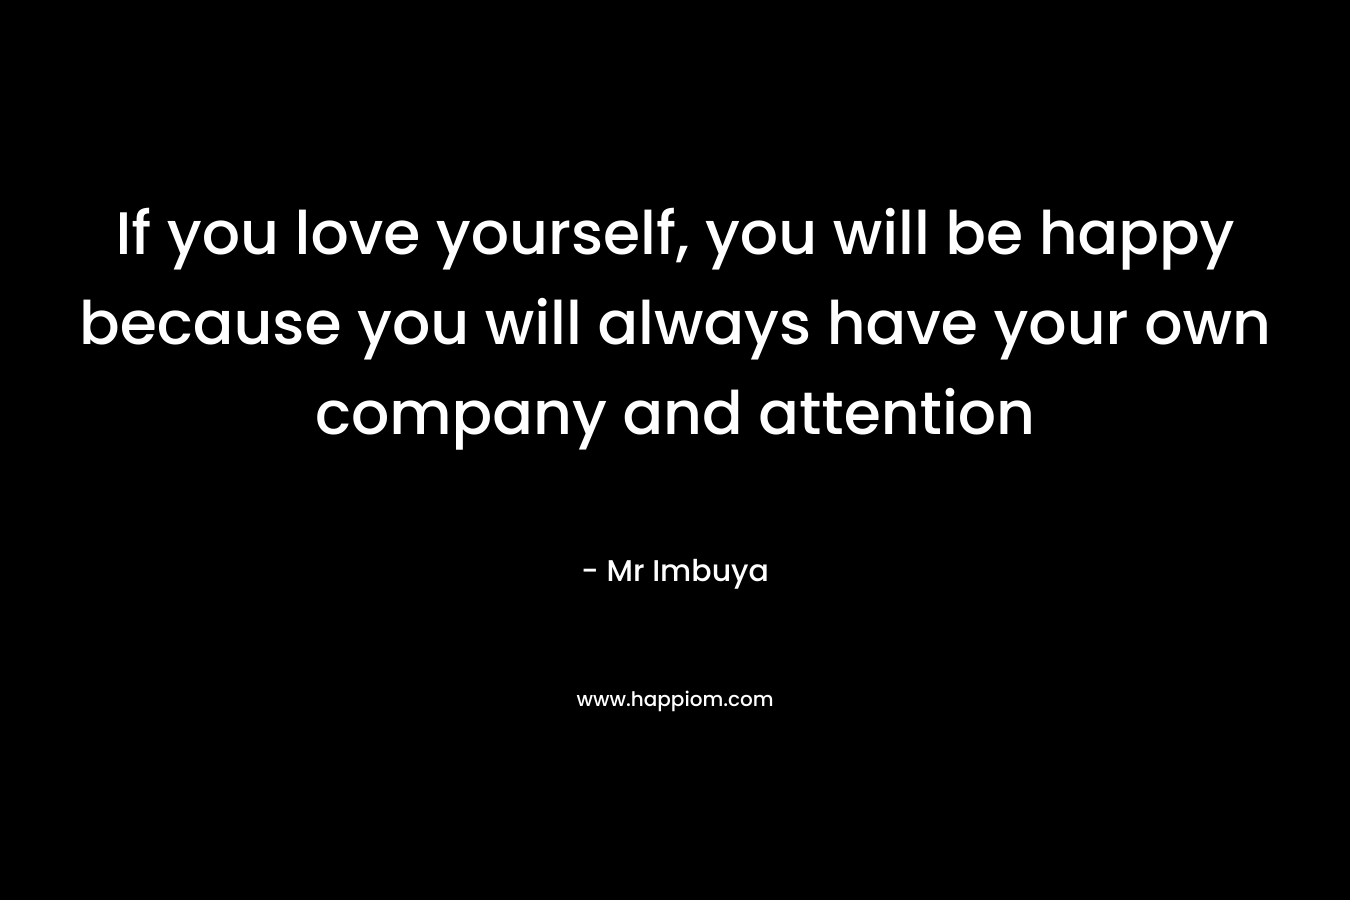 If you love yourself, you will be happy because you will always have your own company and attention